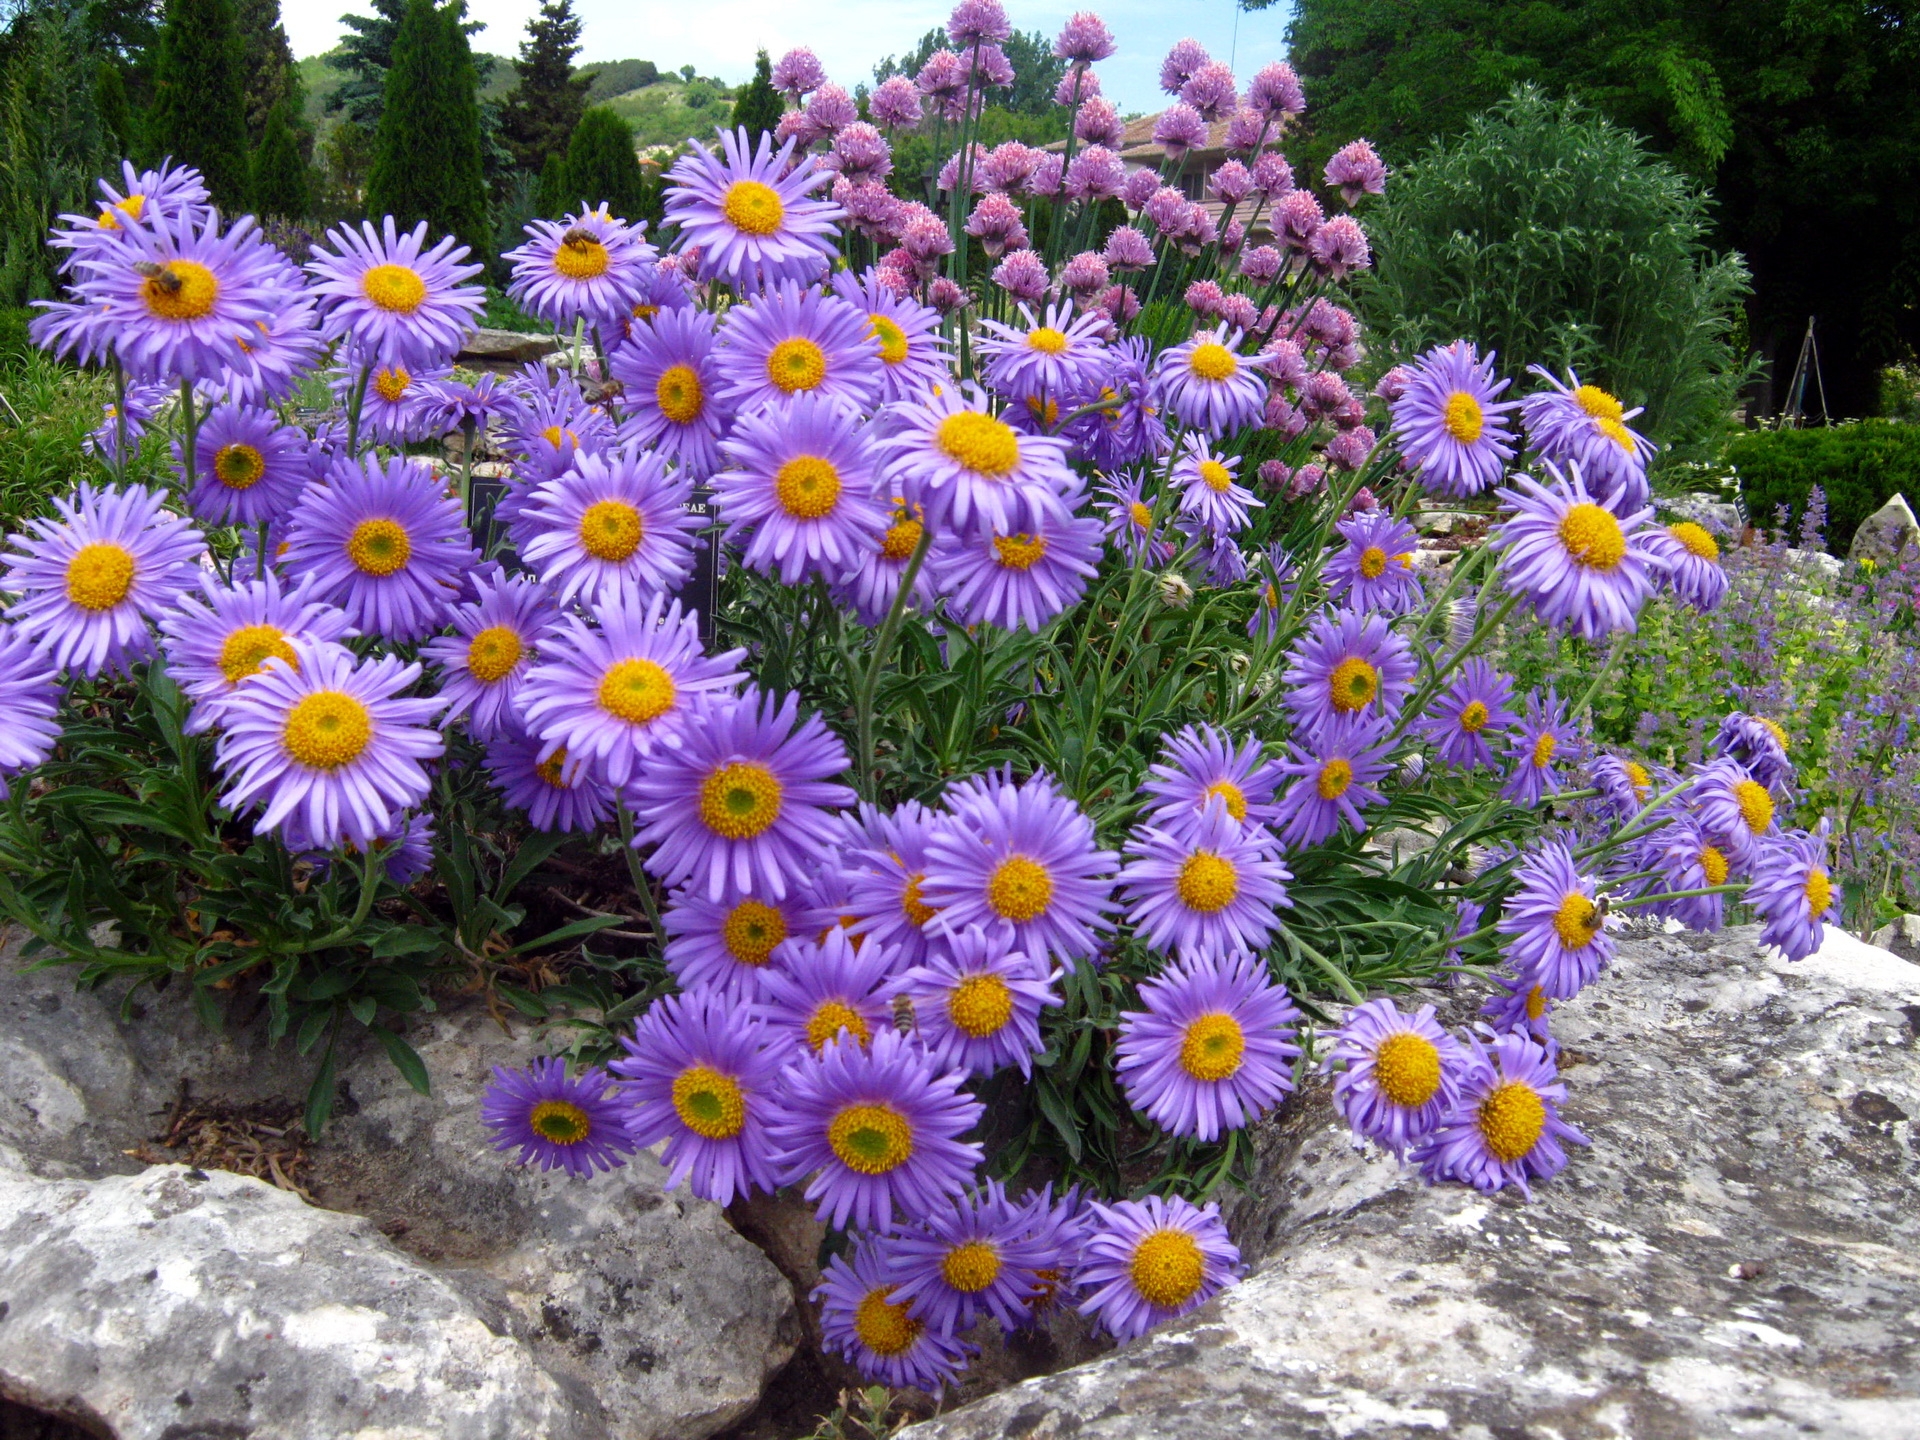 asters, flowers, rock, park, relaxation, rest, stone